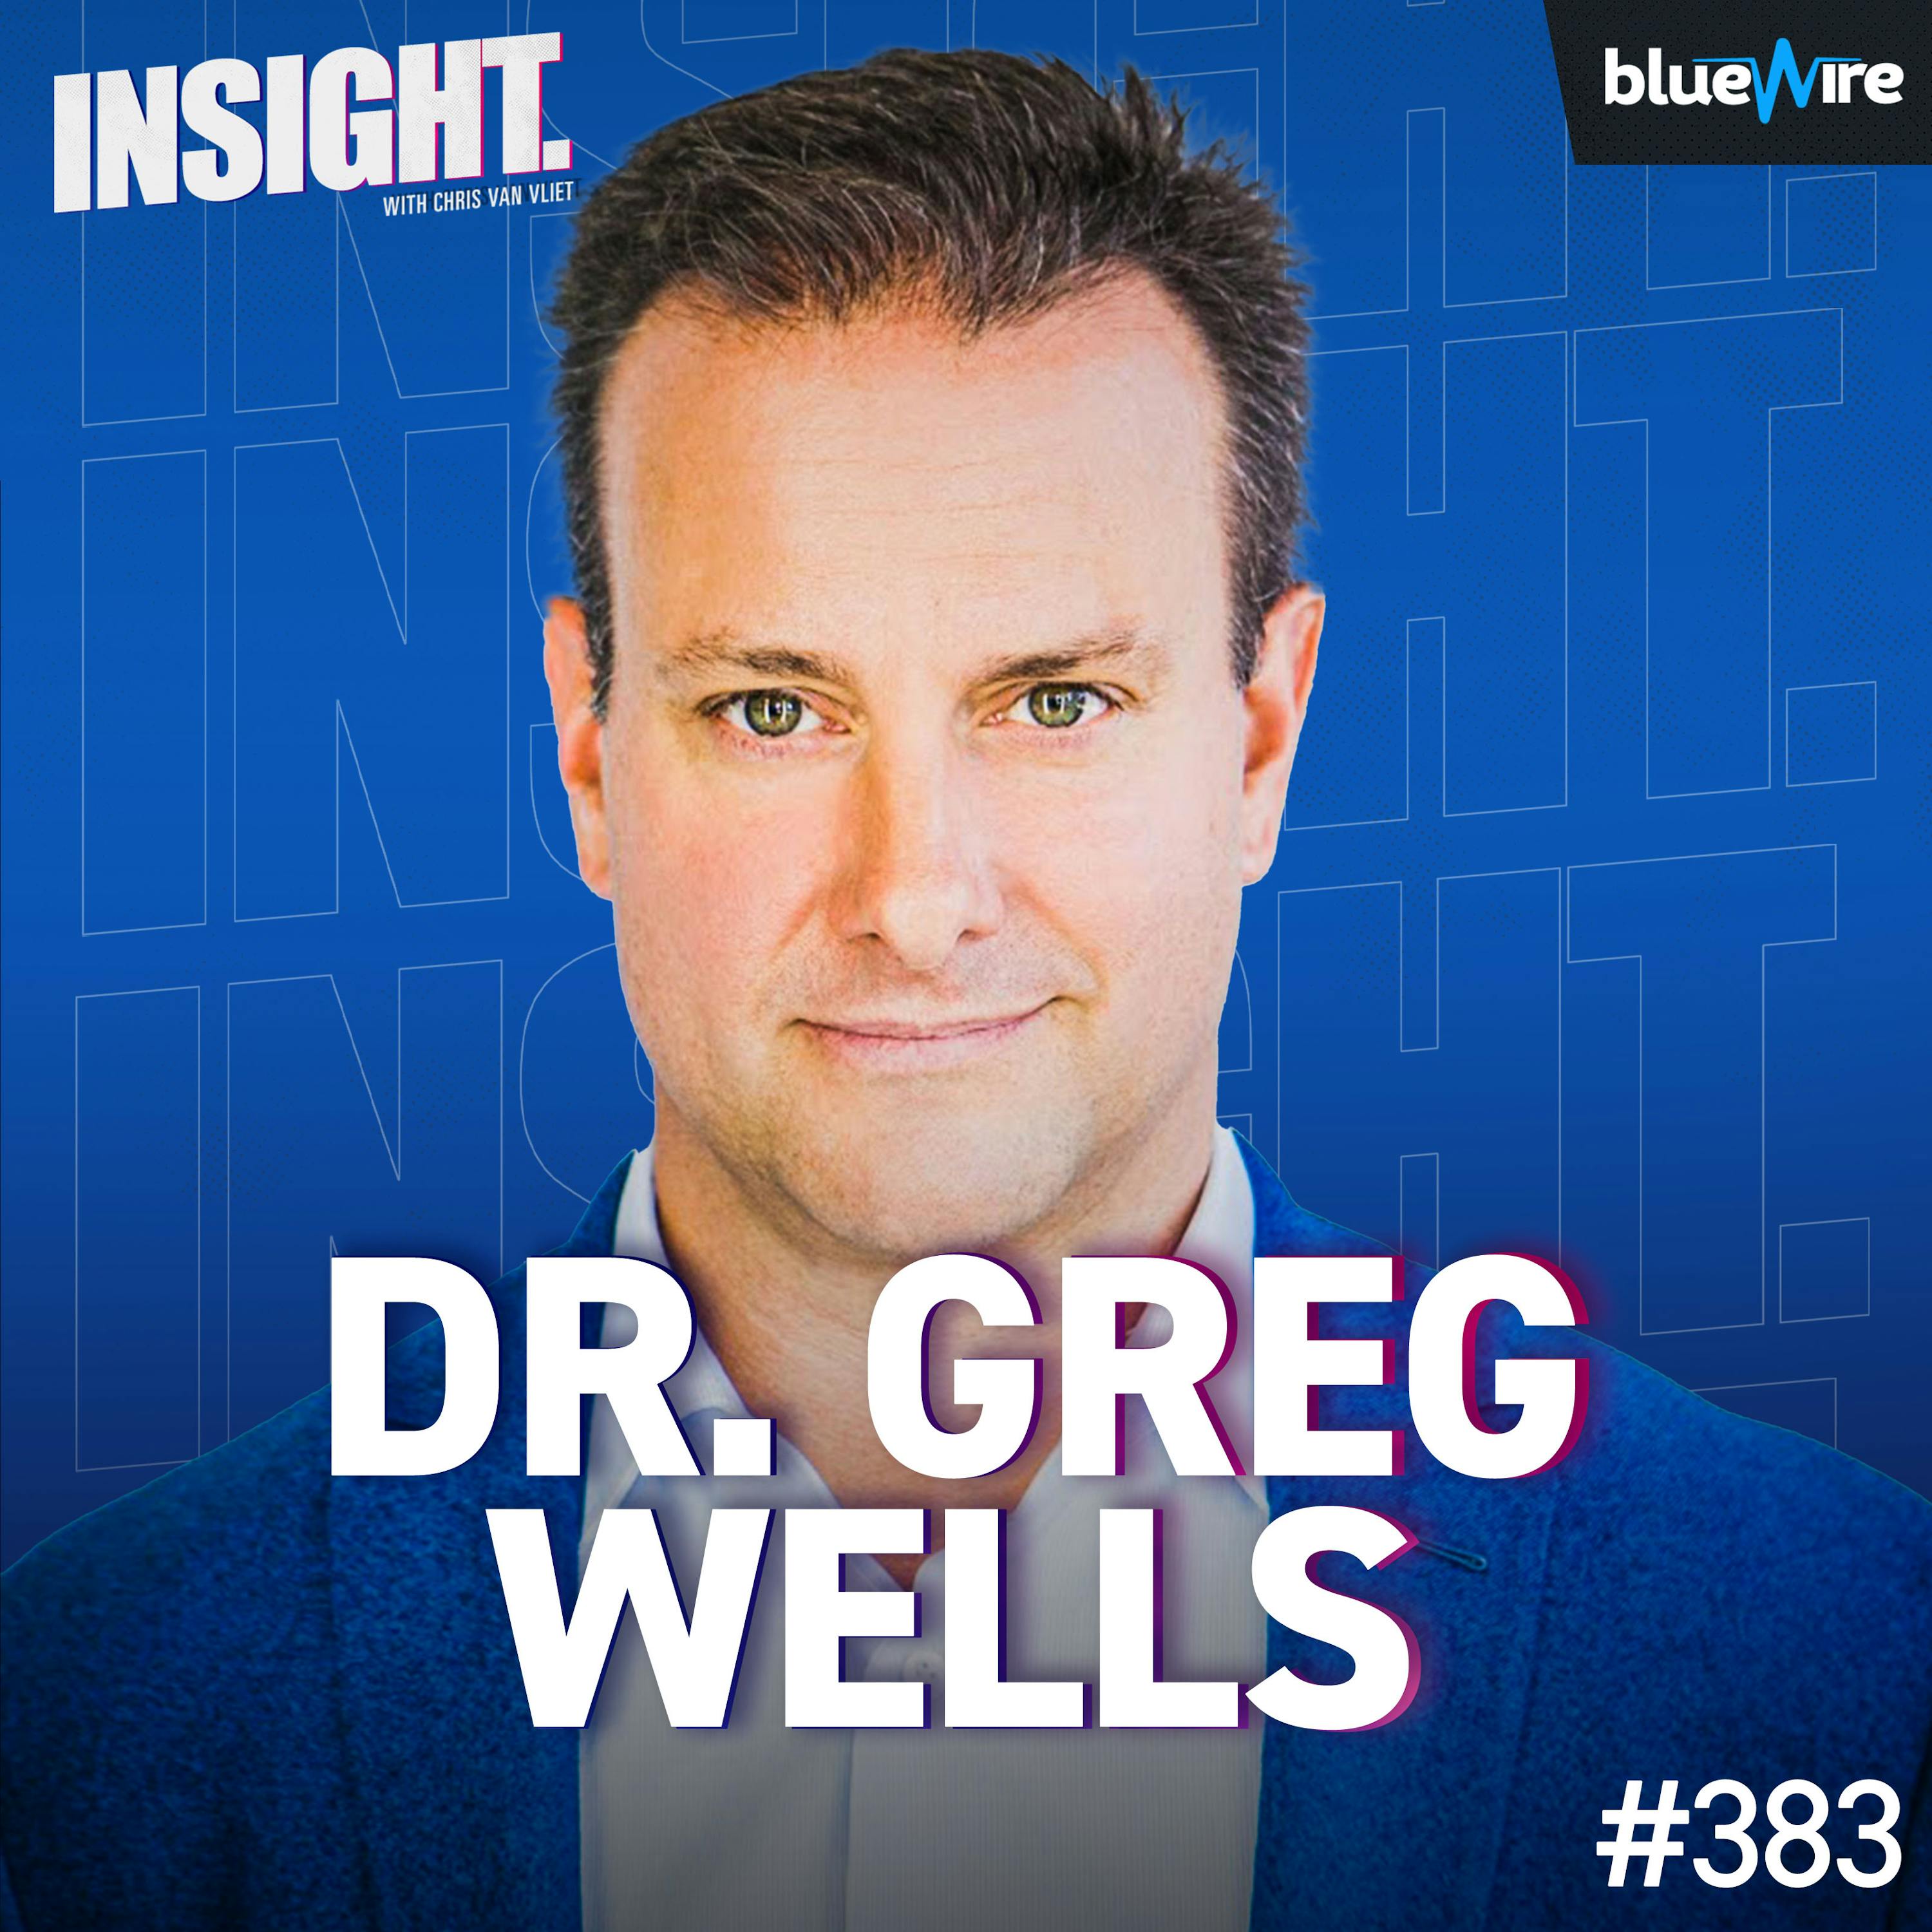 You're Sleeping All Wrong! Dr. Greg Wells On How To Get A Good Night's Sleep Starting TONIGHT Image